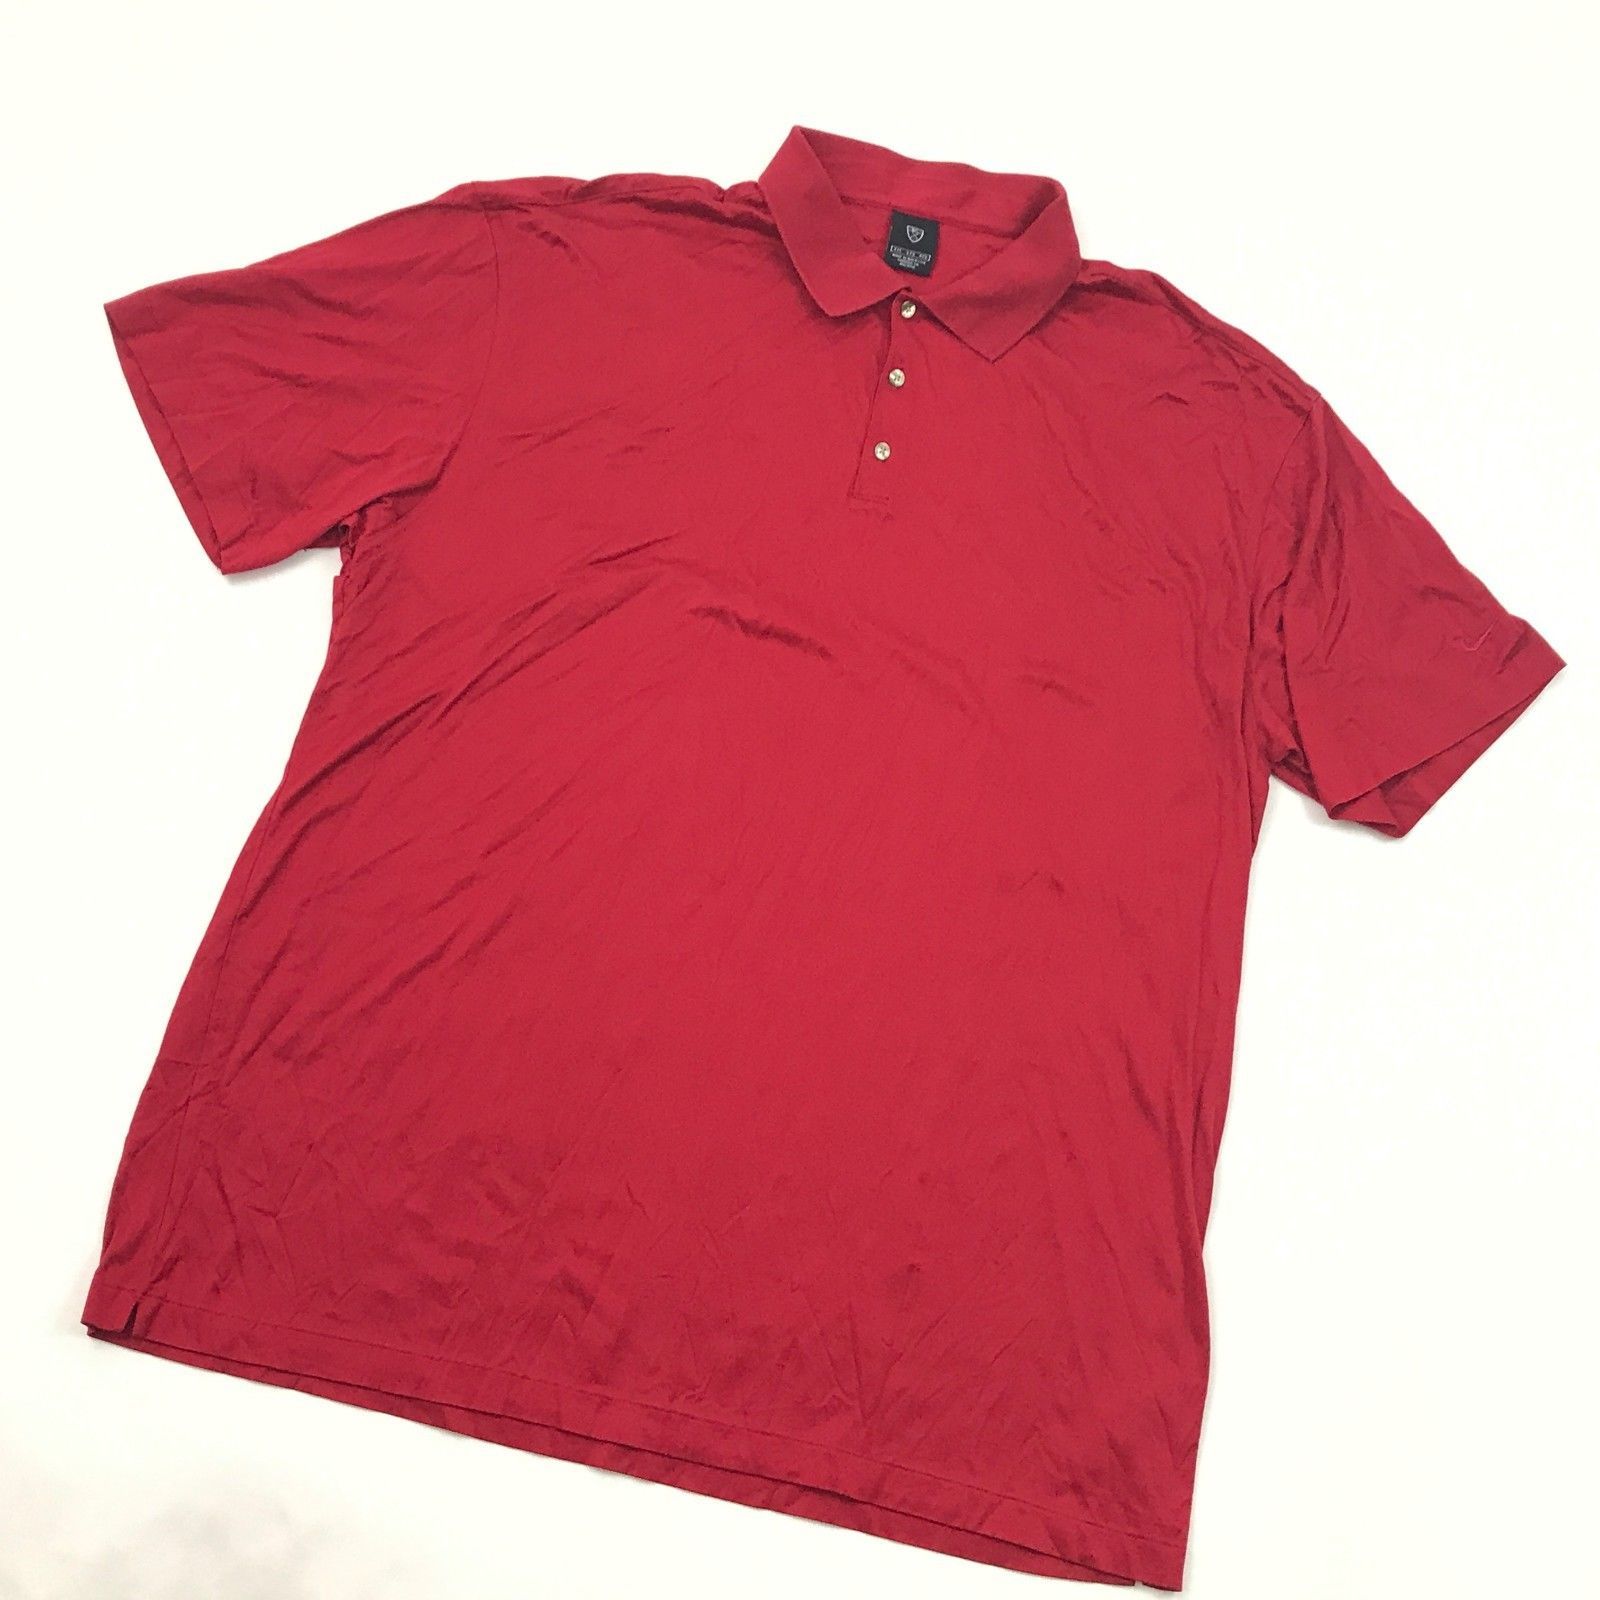 NIKE GOLF Mens 4XL 4X Polo Red Short Sleeve Loose Fit BIG & TALL ...